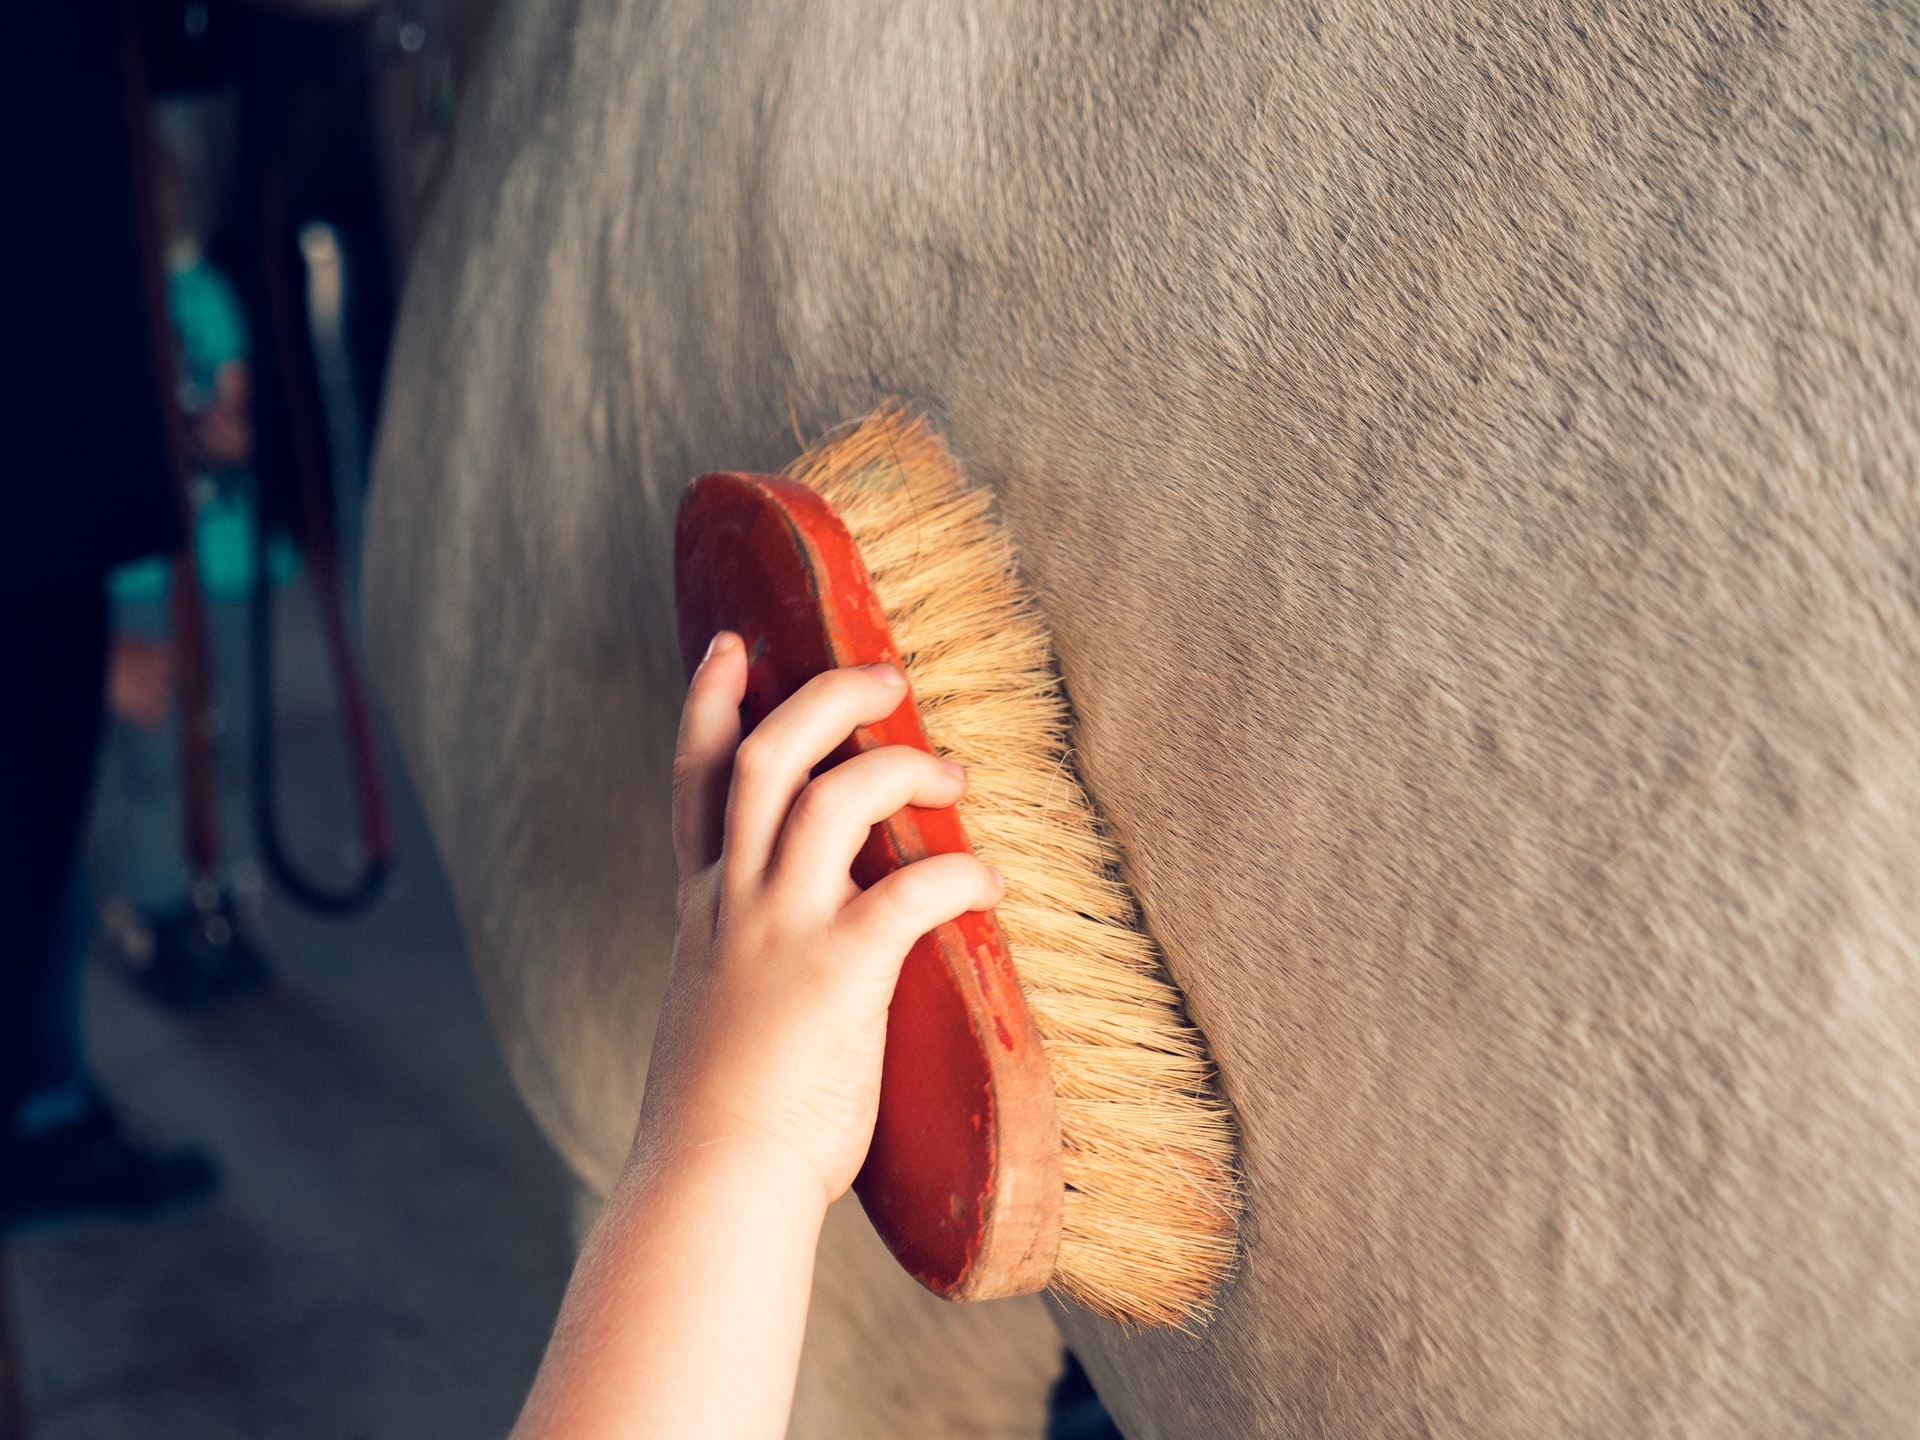 Someone brushing a horse's coat, close up showing just their hand.
